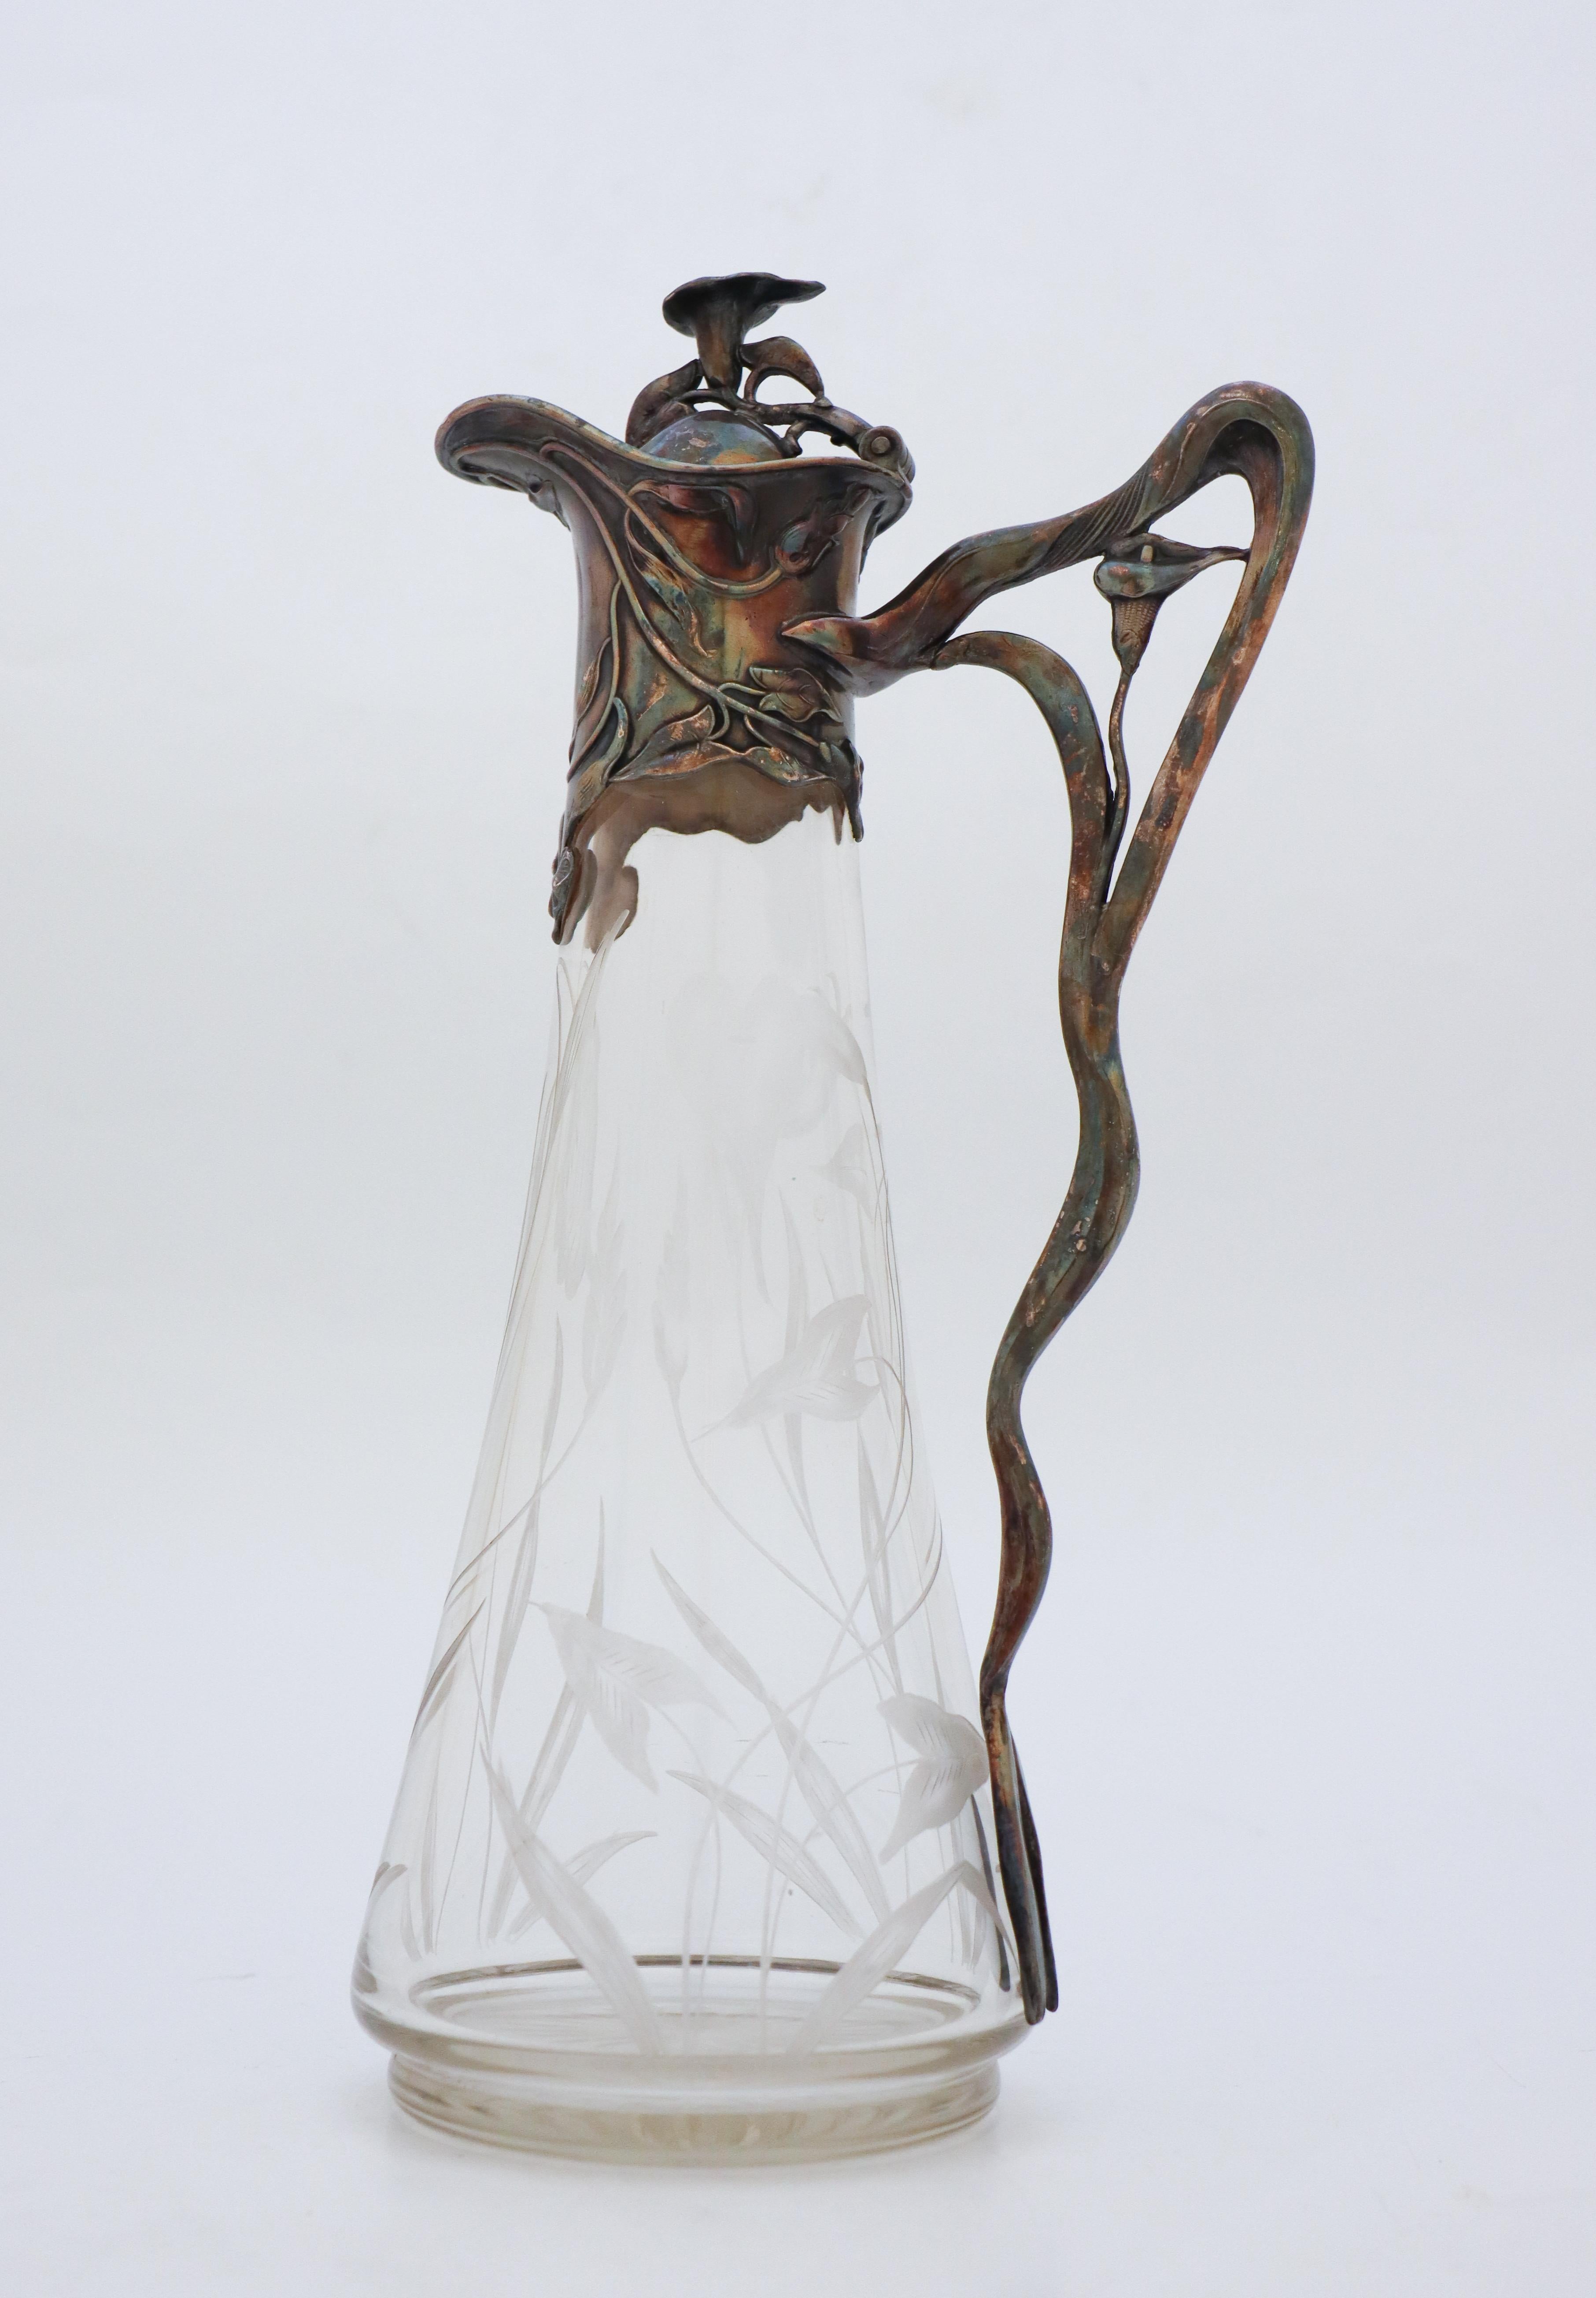 A decanter in Art Nouveau-style. Engraved floral decor on the glass and a lovely art nouveau shape on the metal. It is probably designed in Germany in the early 20th century. It is 32 cm (12,8